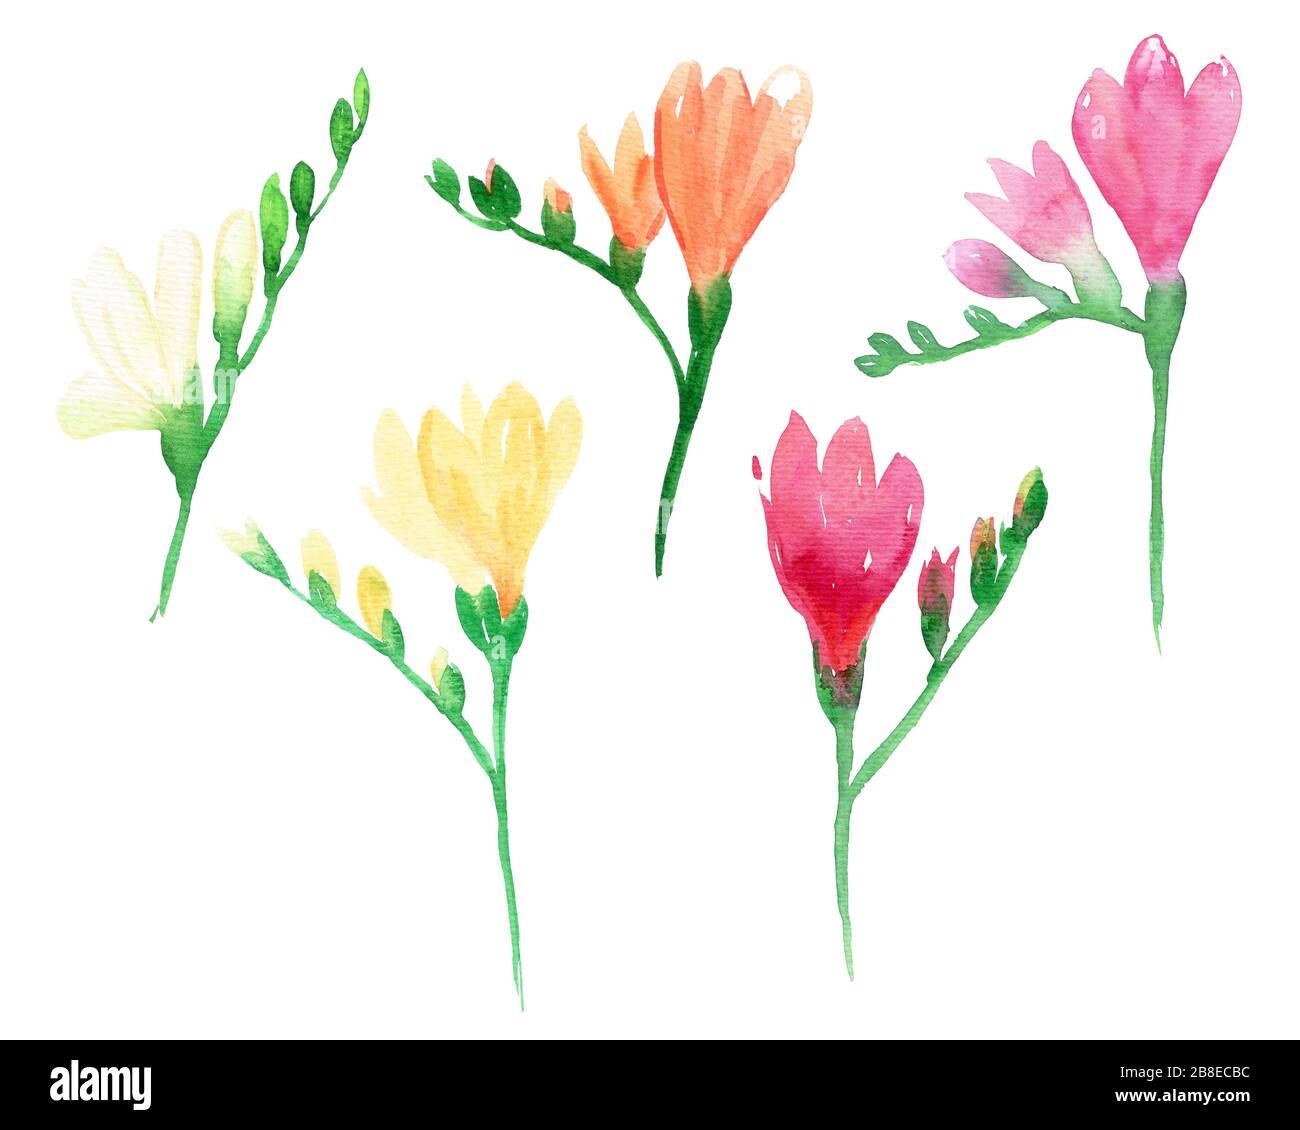 Watercolor set of freesia flowers. Red, pink, yellow and orange flowers isolated on white background. Floral illustration for design, print, fabric or Stock Photo